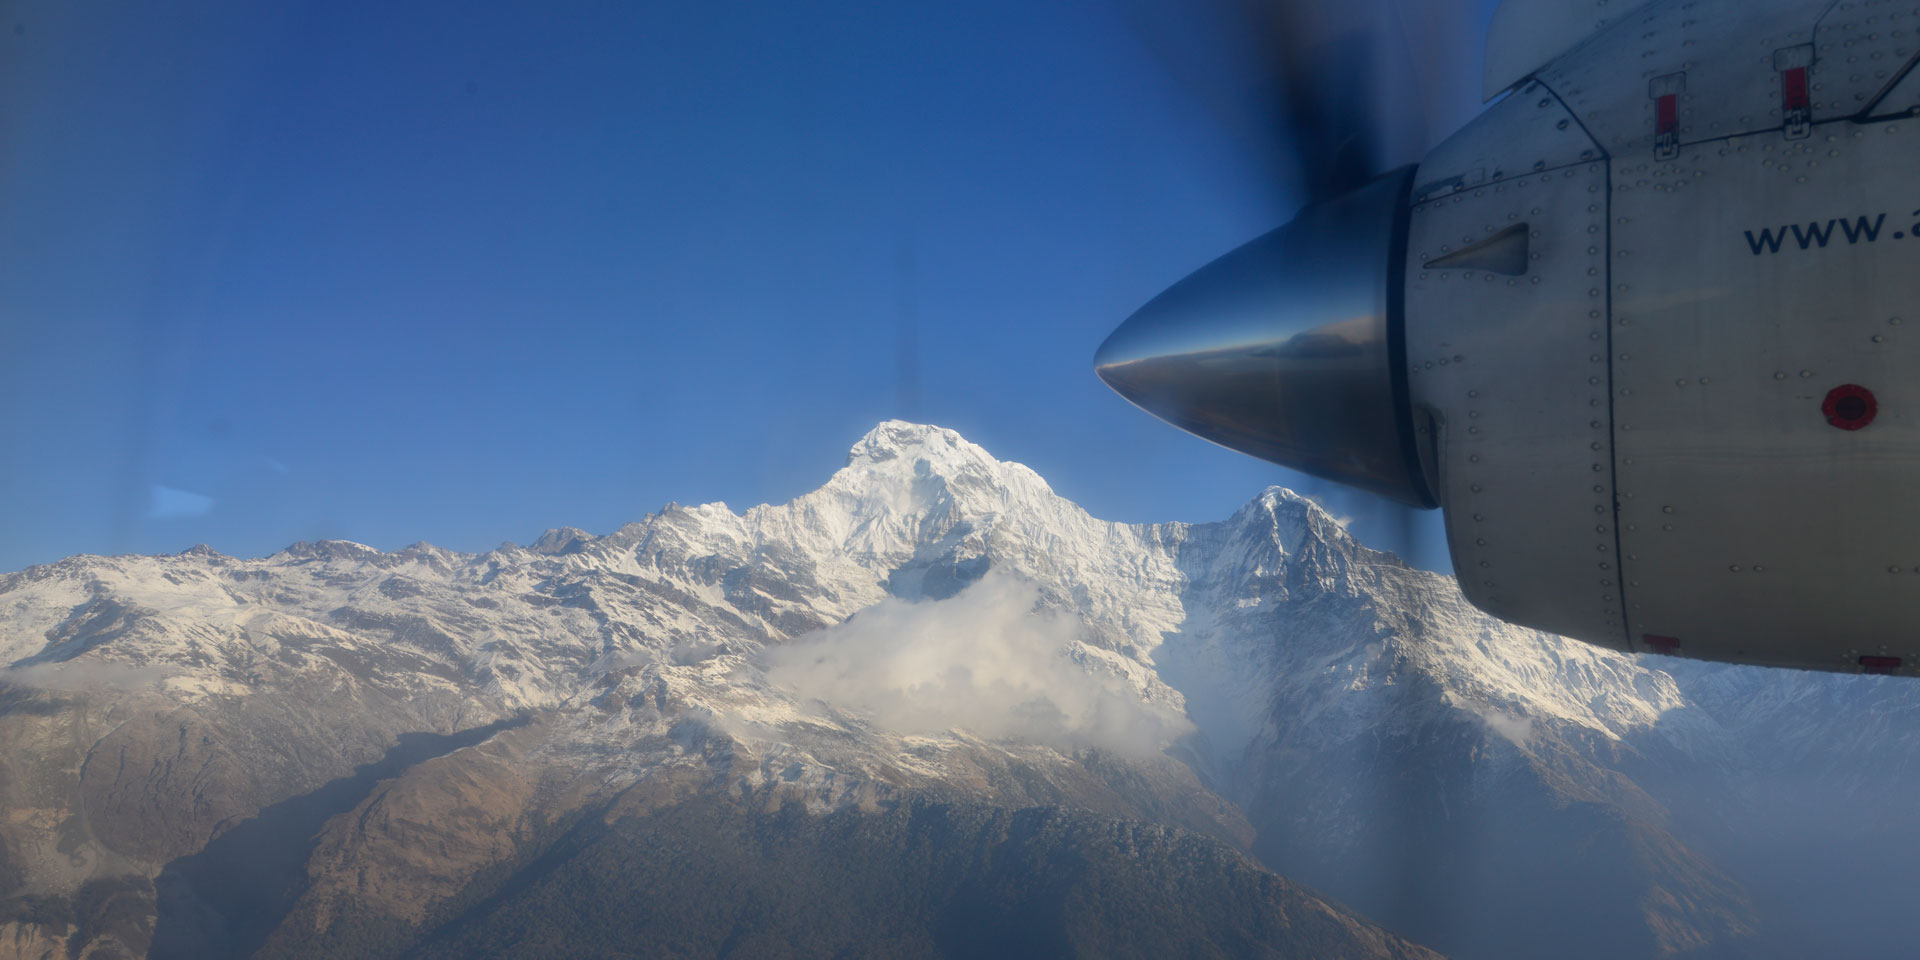 Flying to Jomsom is amazing, passing between Dhaulagiri on the western side and Annapurna on the eastern